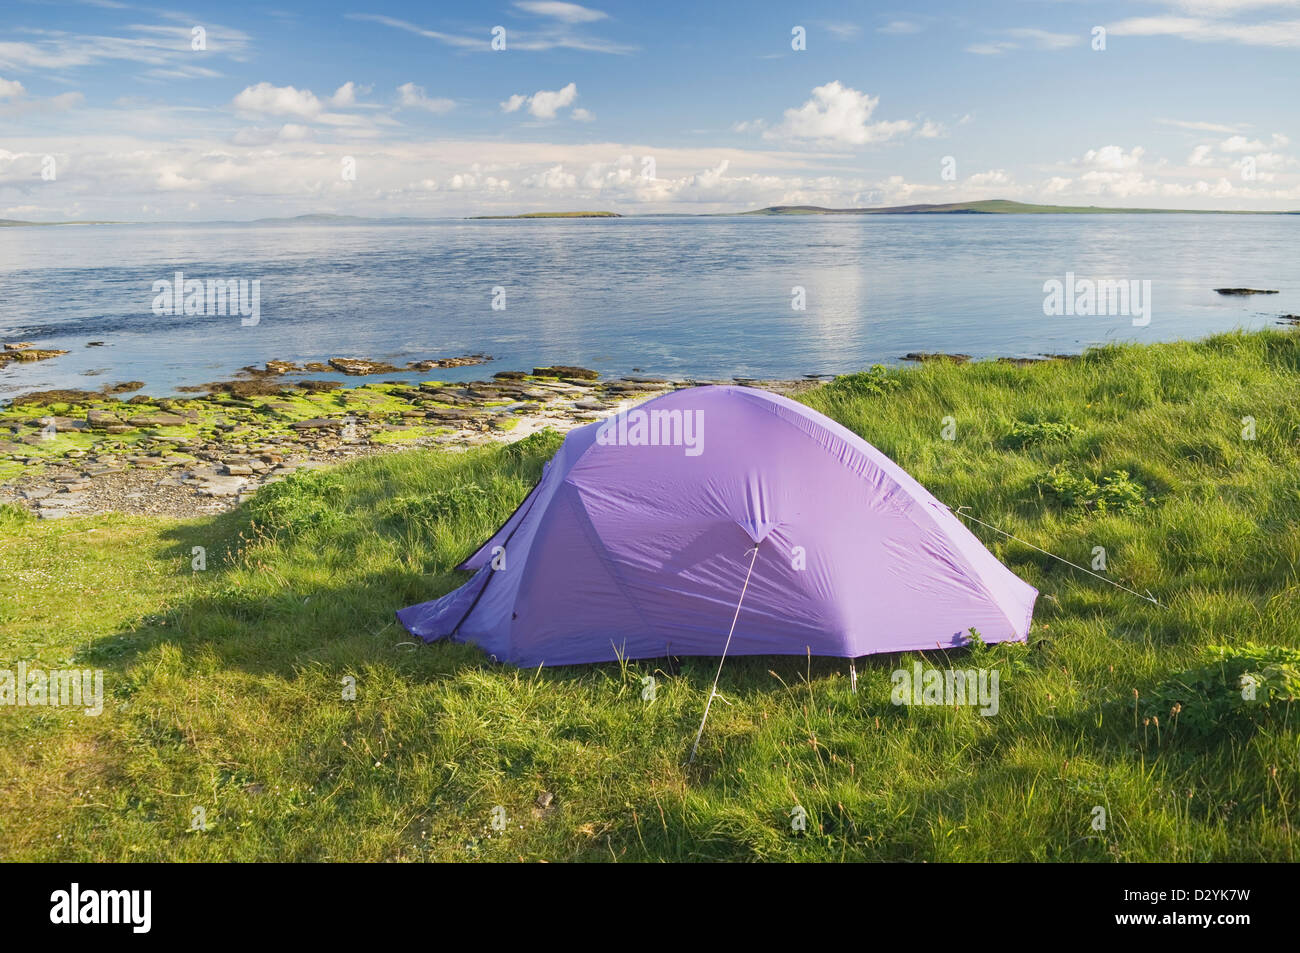 Wild camping on the island of Shapinsay in the Orkney Islands, Scotland. Stock Photo